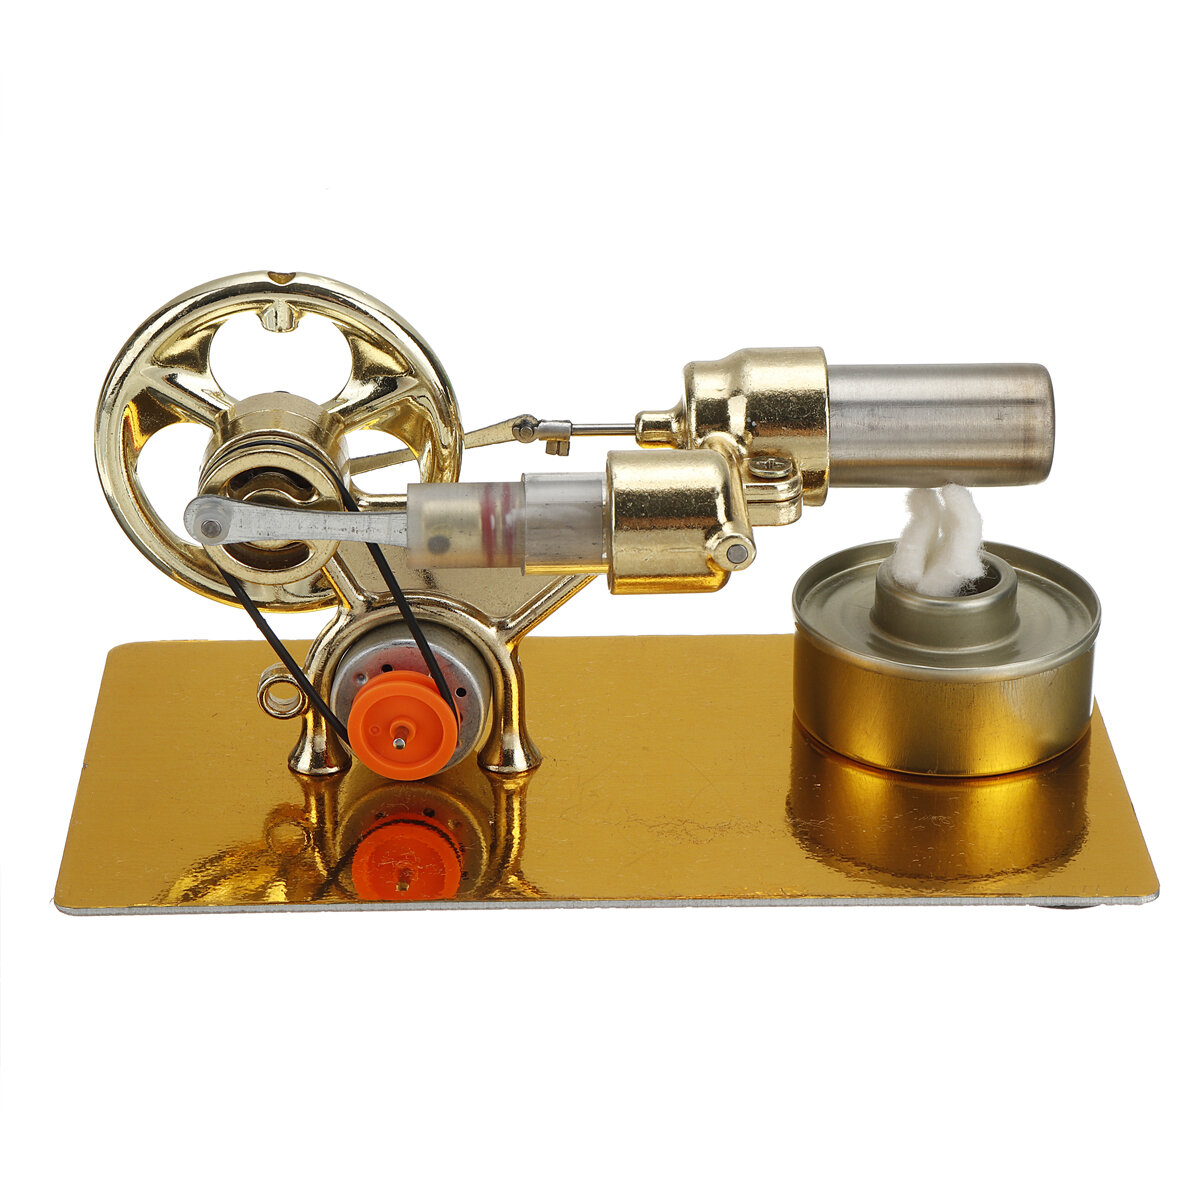 1PC 16 x 8.5 x 11 cmPhysical Science DIY Kits Stirling Engine Model with Parts